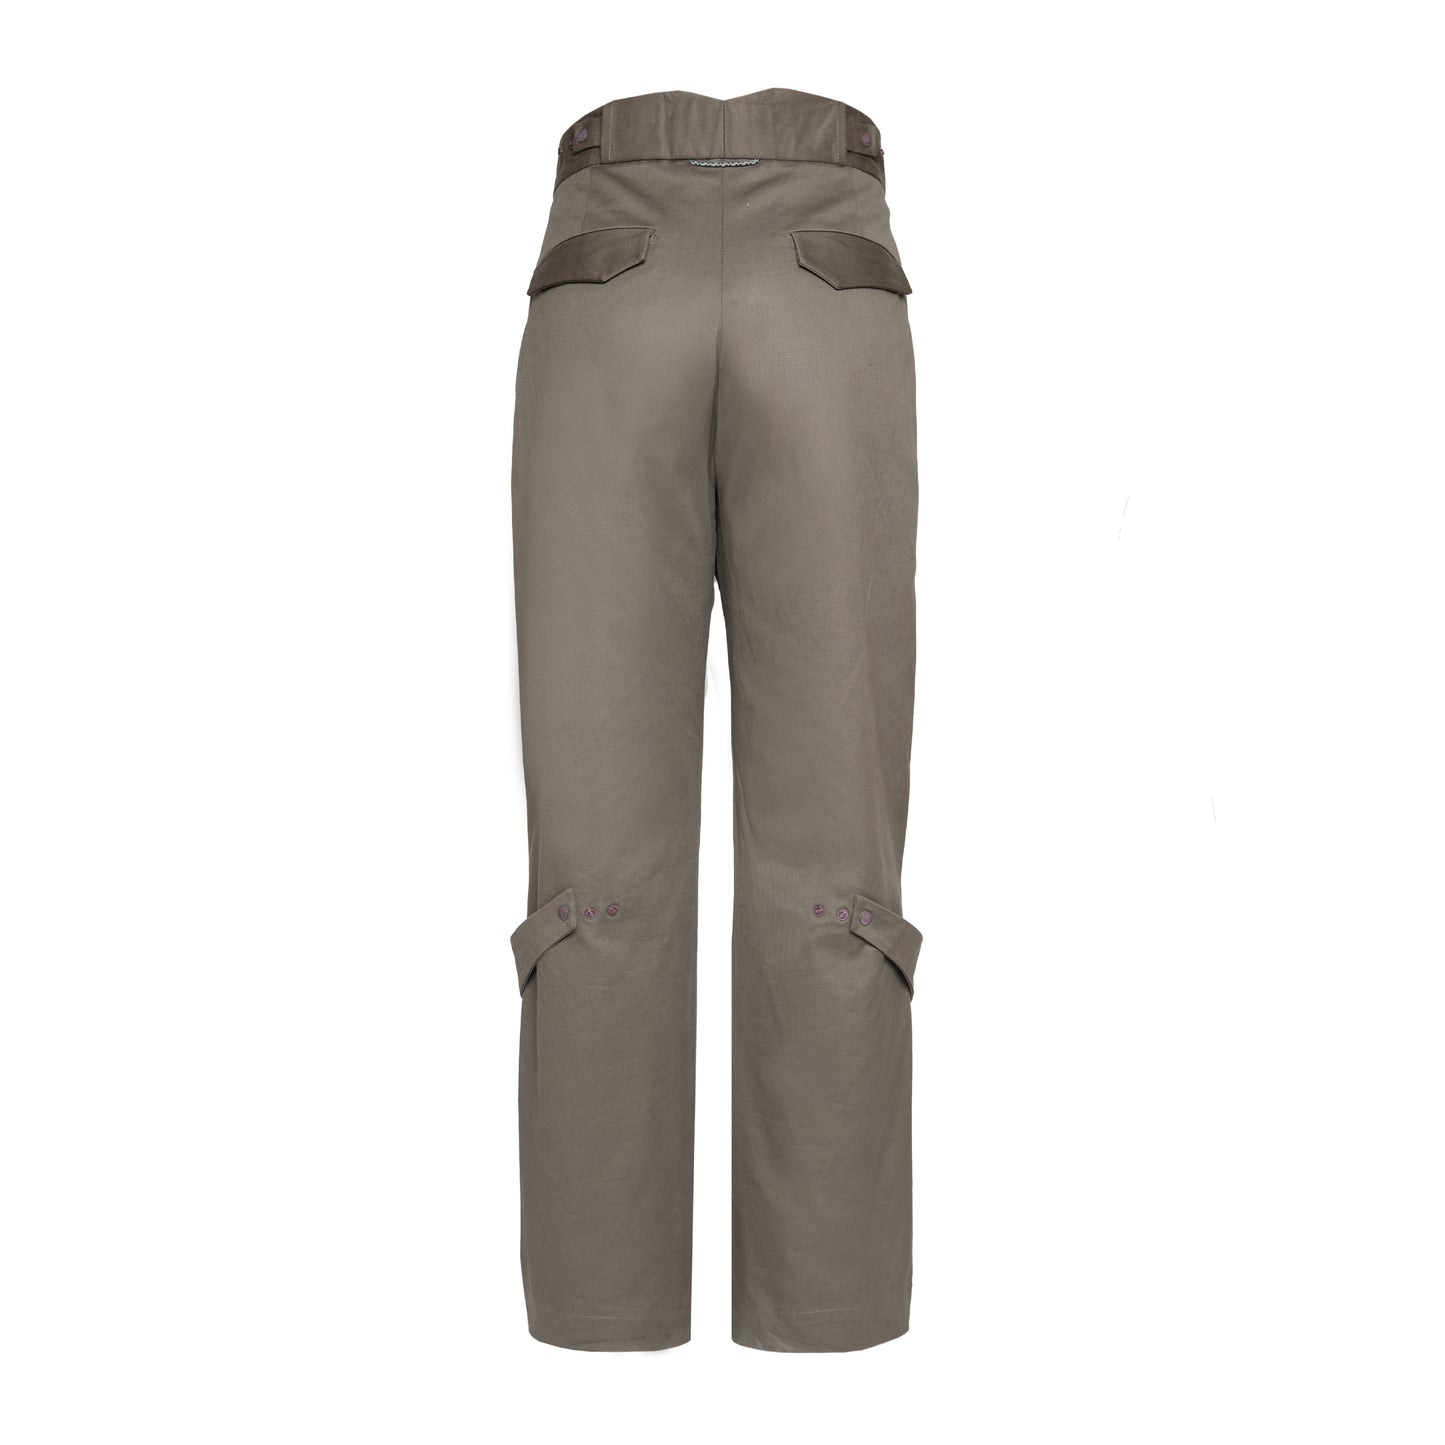 ASKEW TAILORED GREY TROUSERS